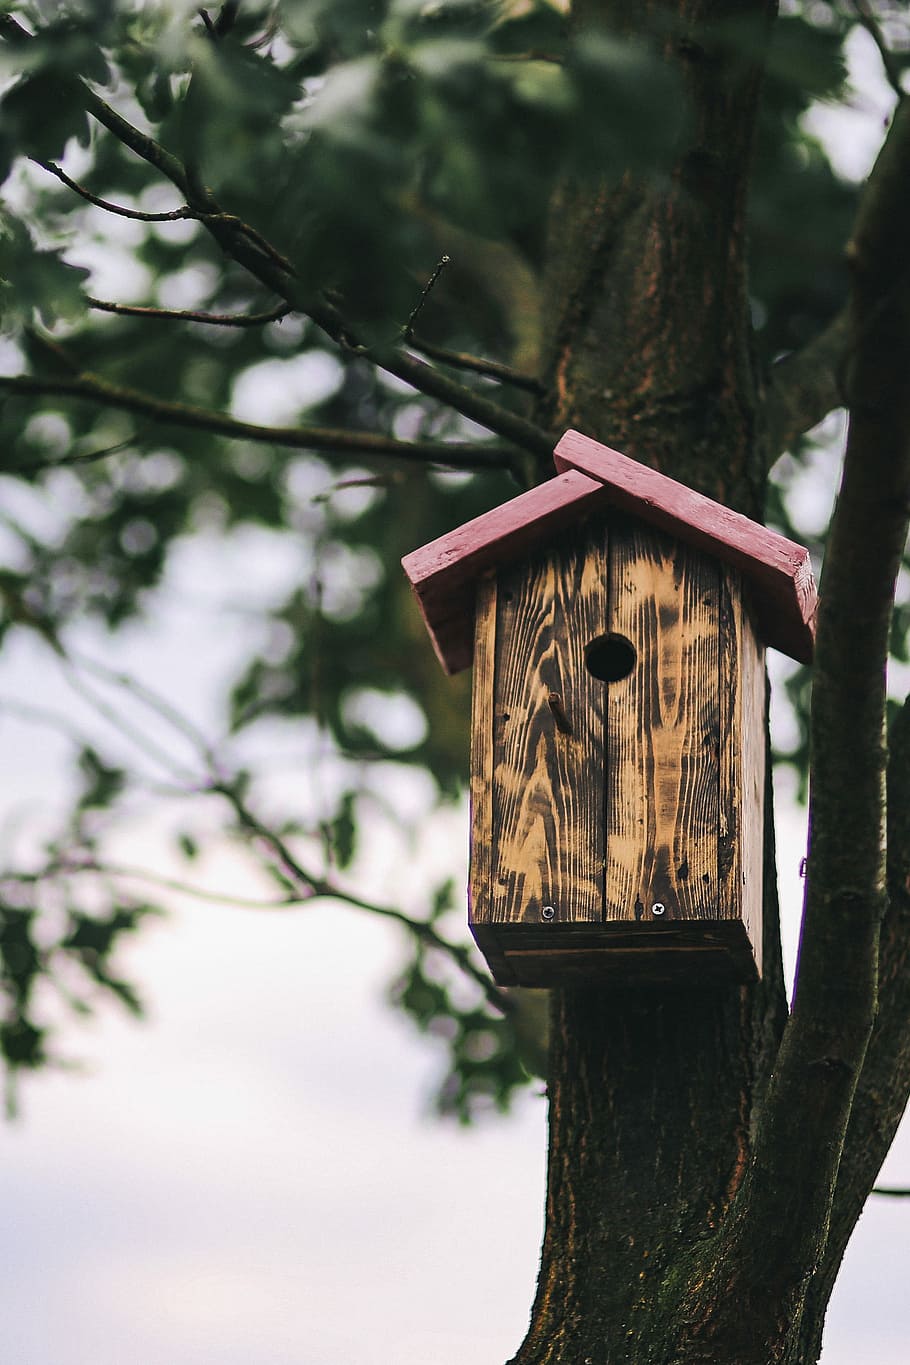 Birdhouse on a Tree, box, wooden, animal Nest, nature, wood - Material, HD wallpaper